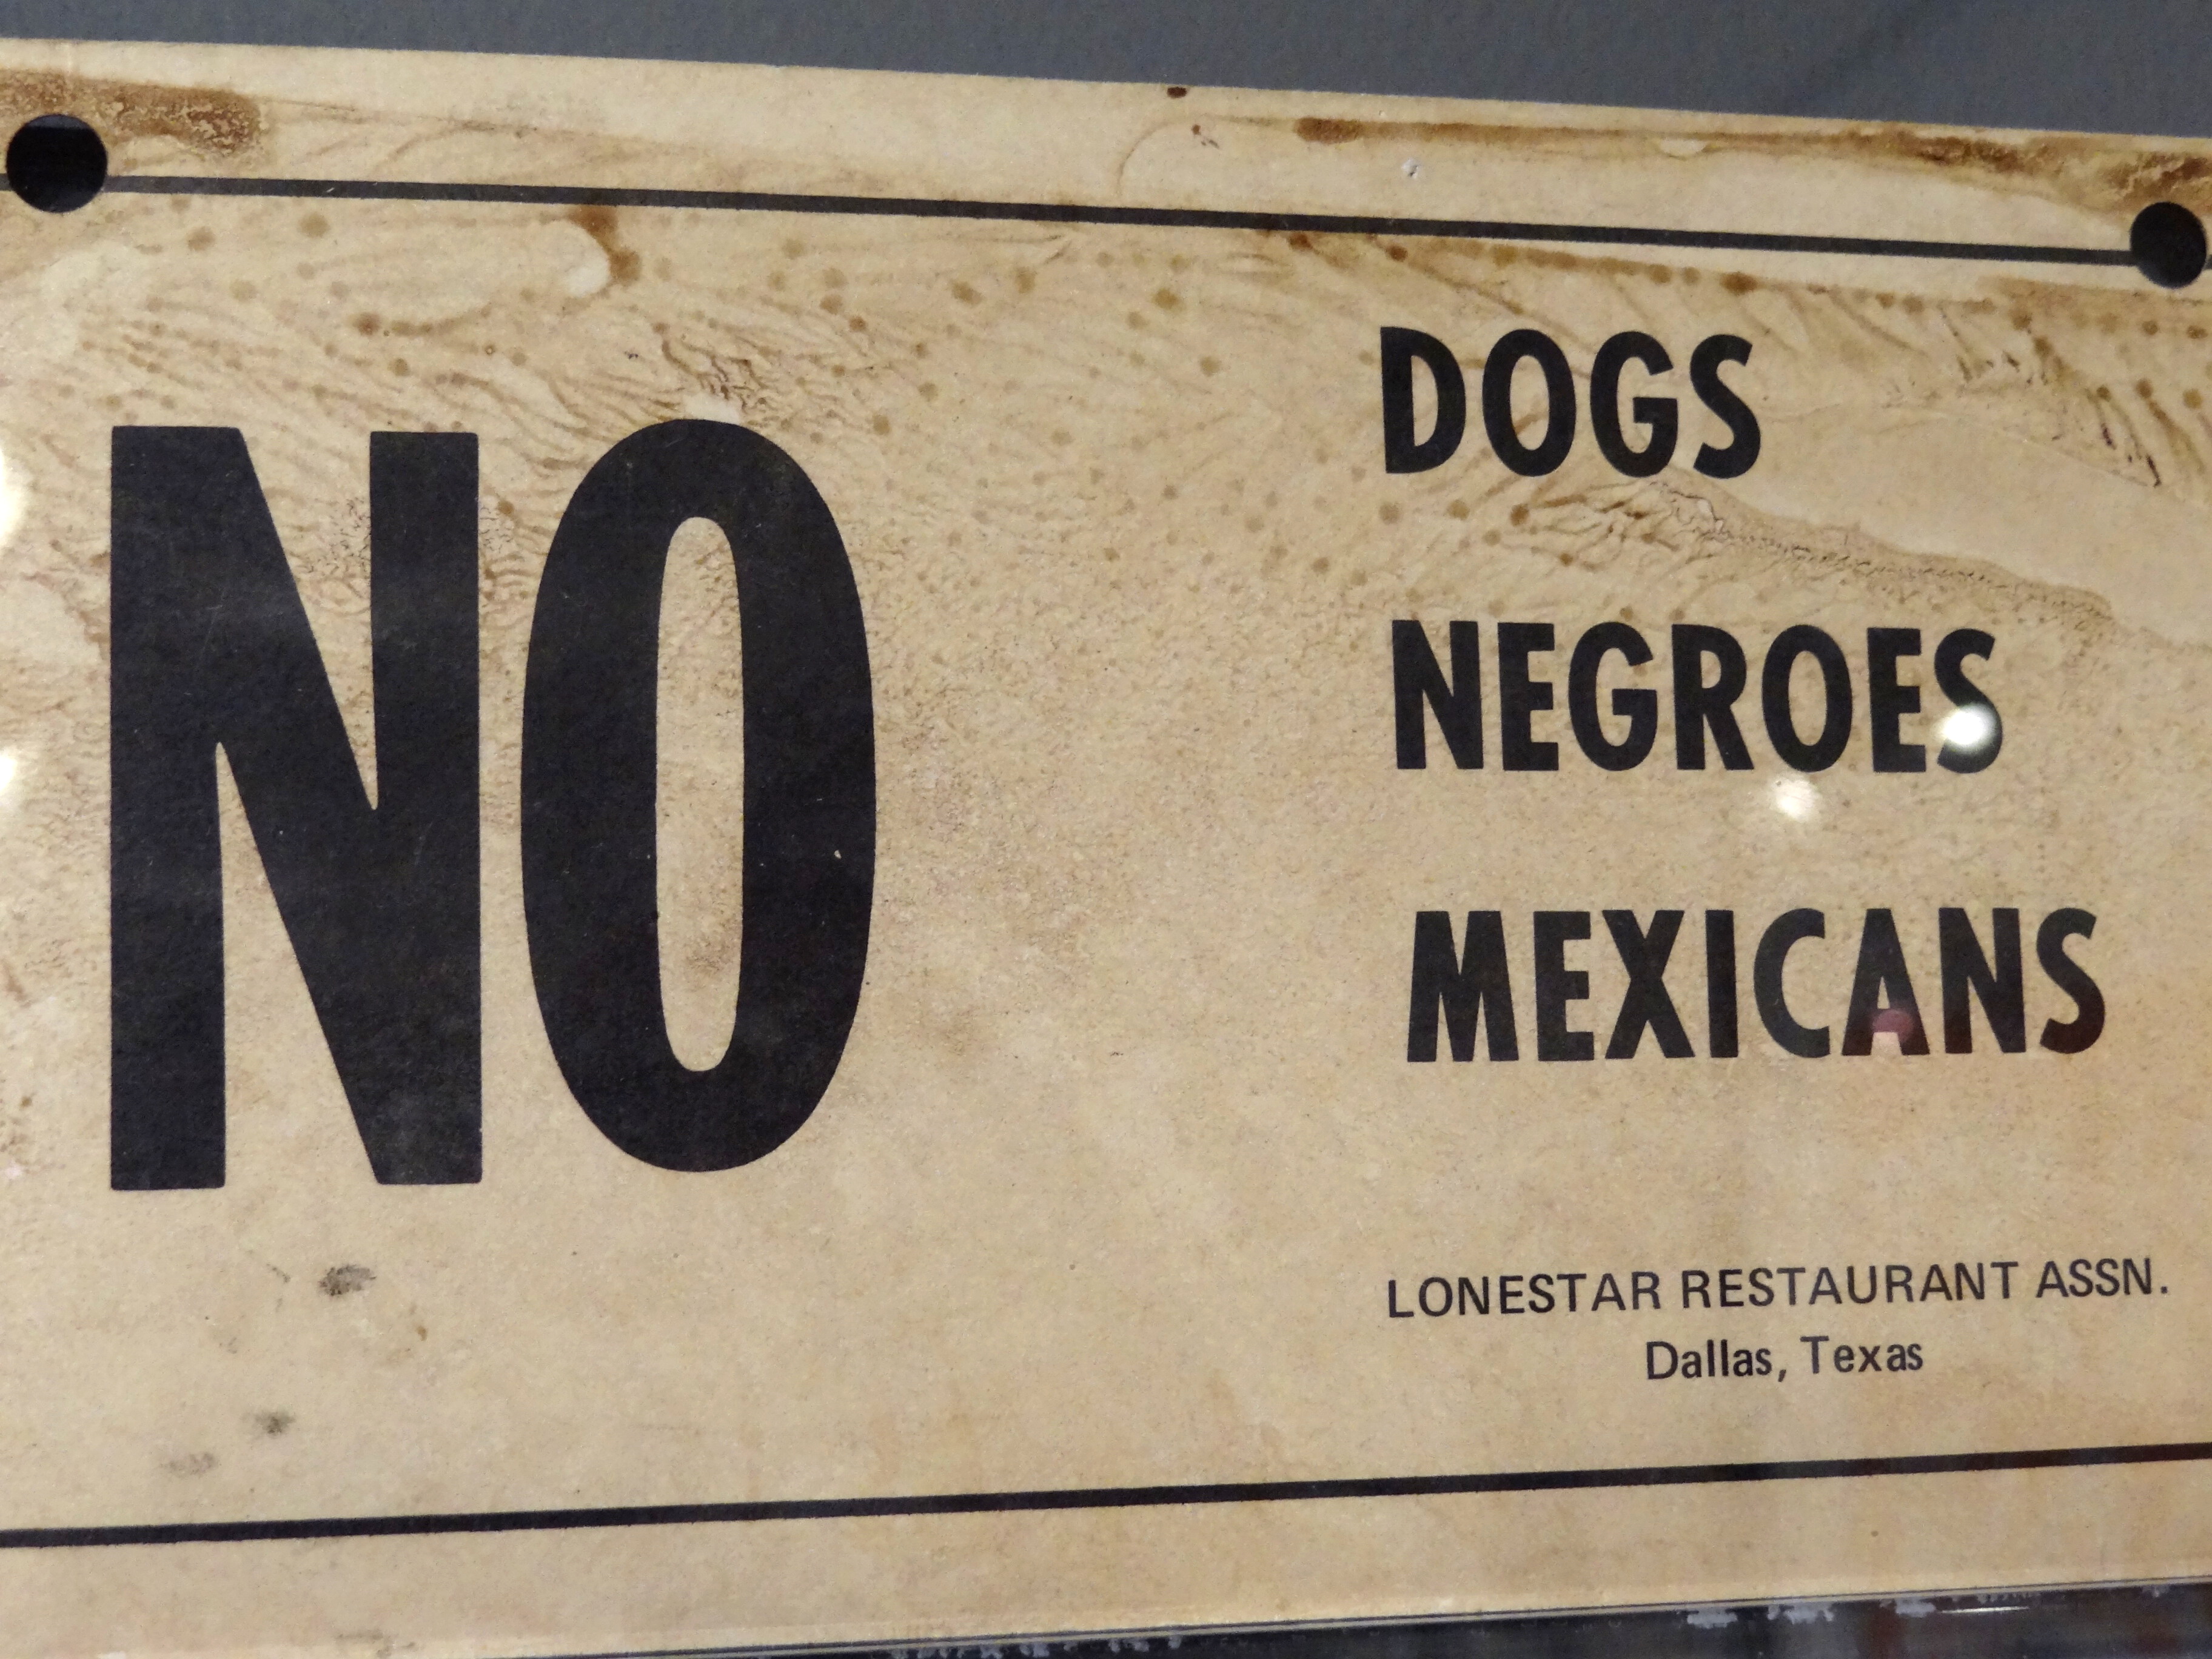 Racist sign from Memphis, Tennessee that reads, “No Dogs, Negroes, Mexicans. Lonestar Restaurant Assn. Dallas, Texas.”